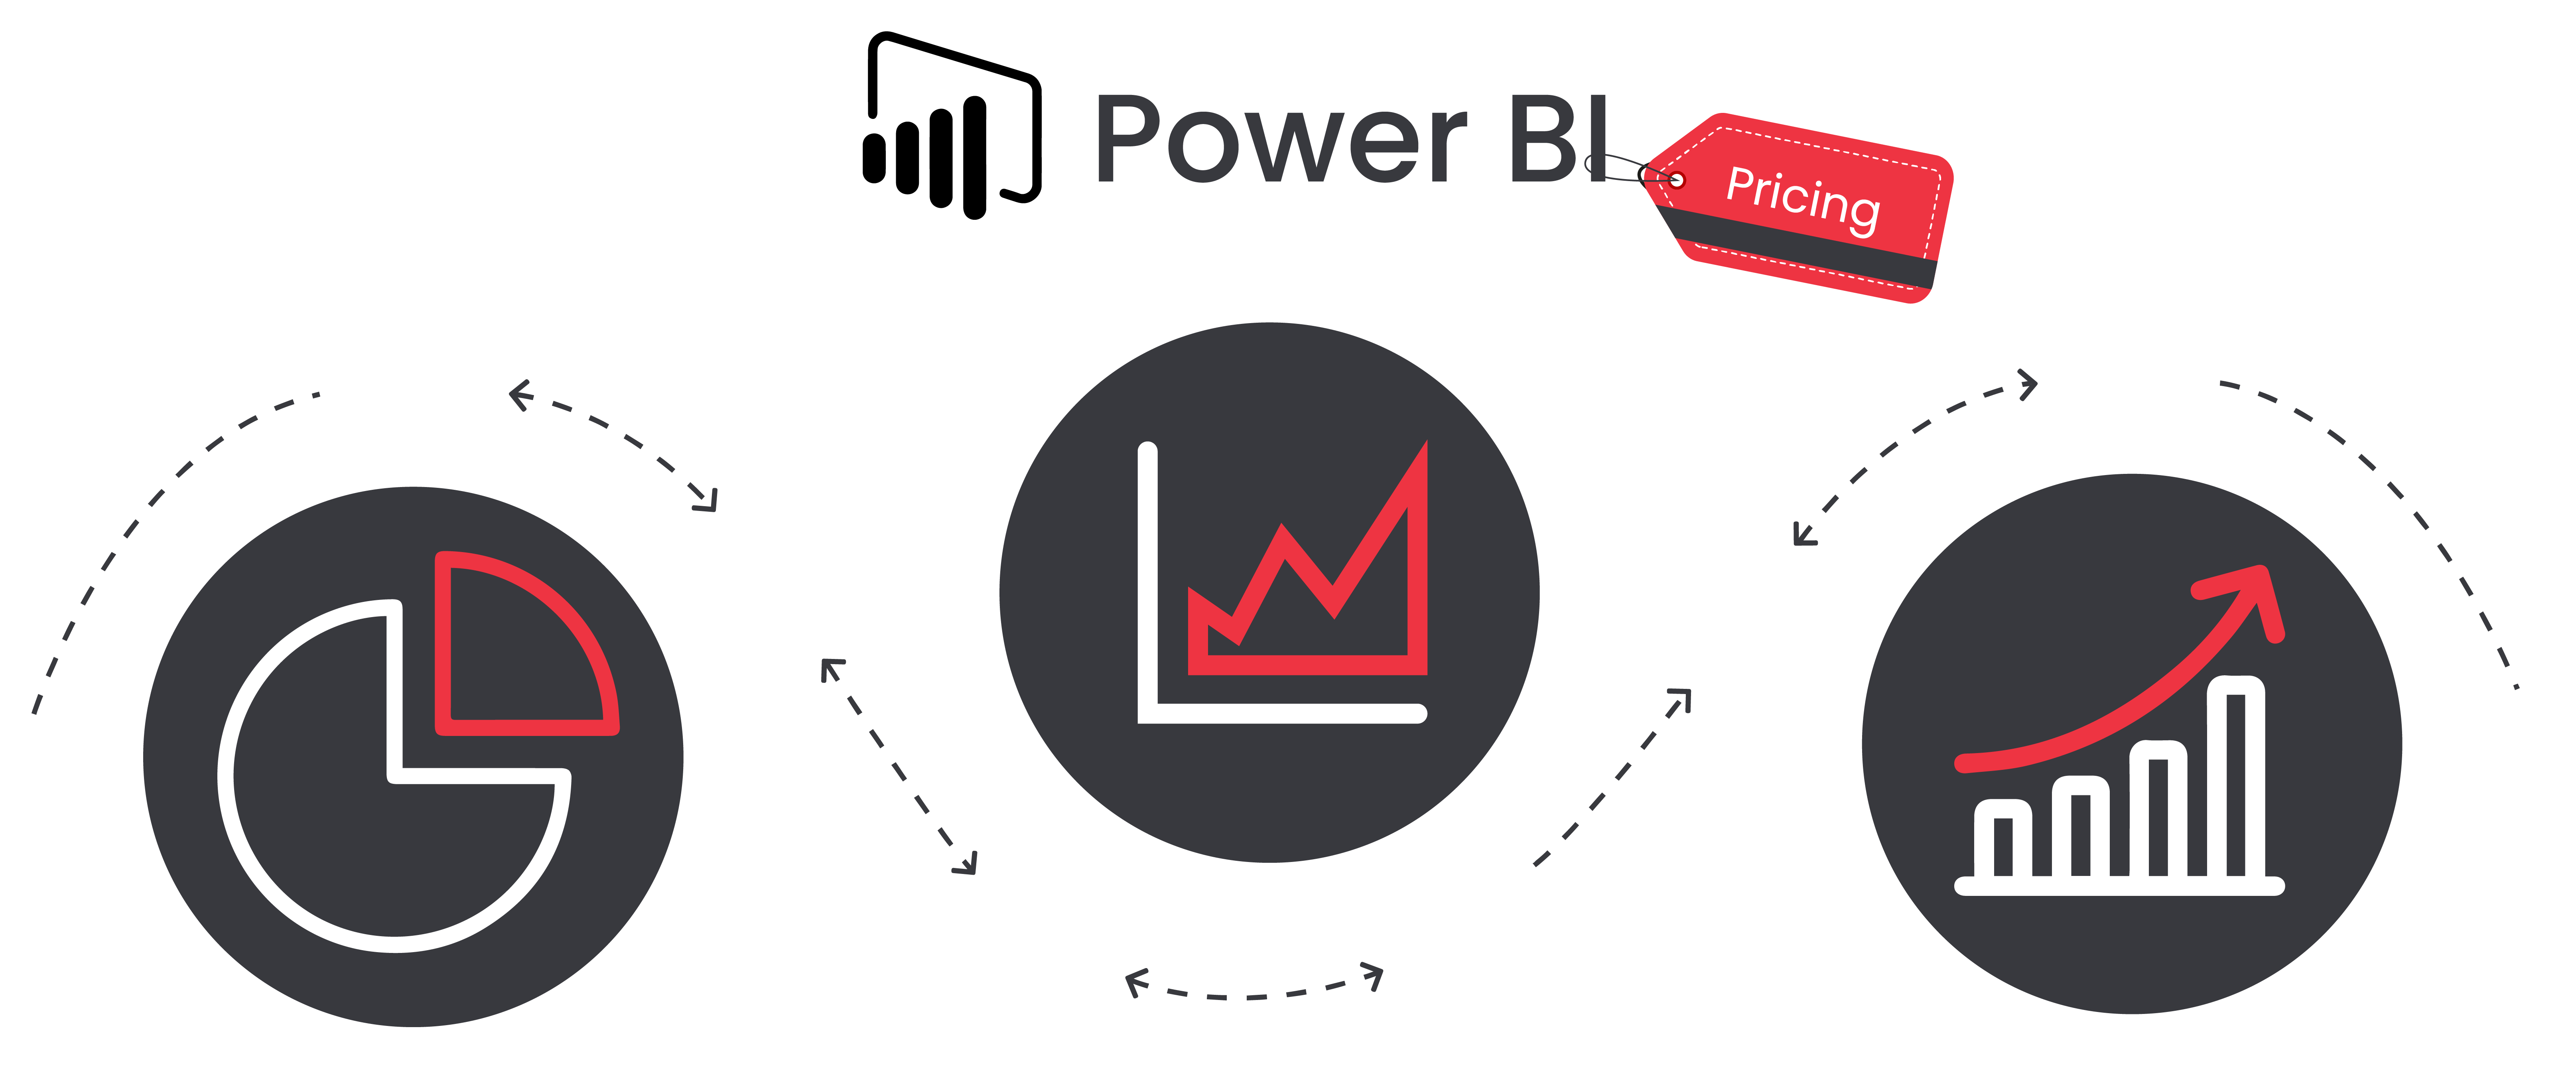 Power BI Free, Pro and Premium: Features, Limitations and Pricing